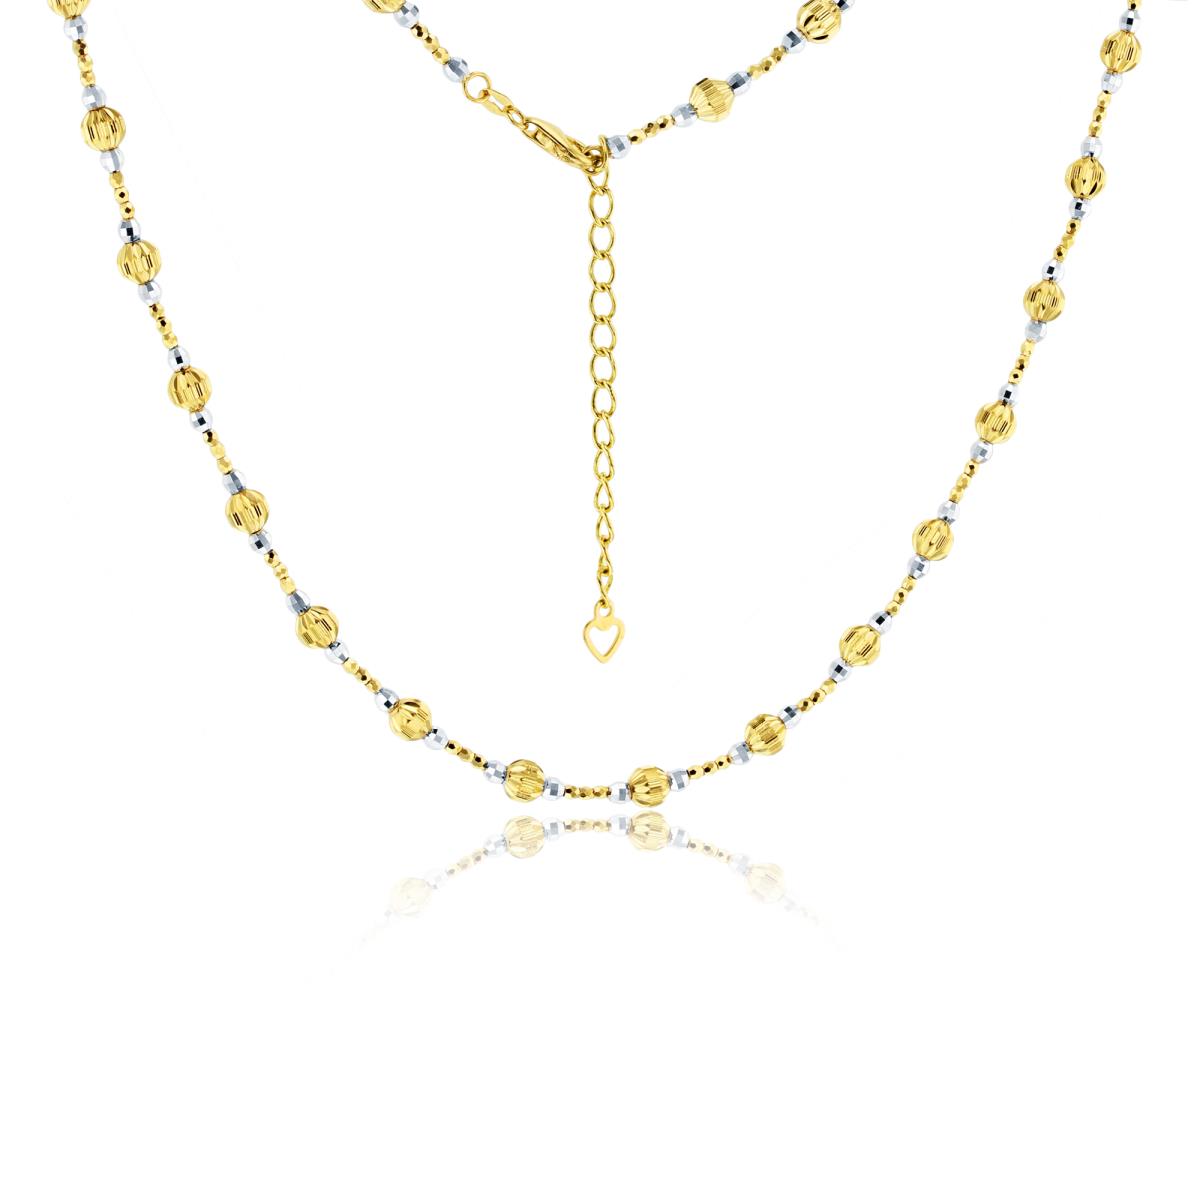 14K Two-Tone Gold Graduated Diamond Cut Beaded 18"+2" Necklace